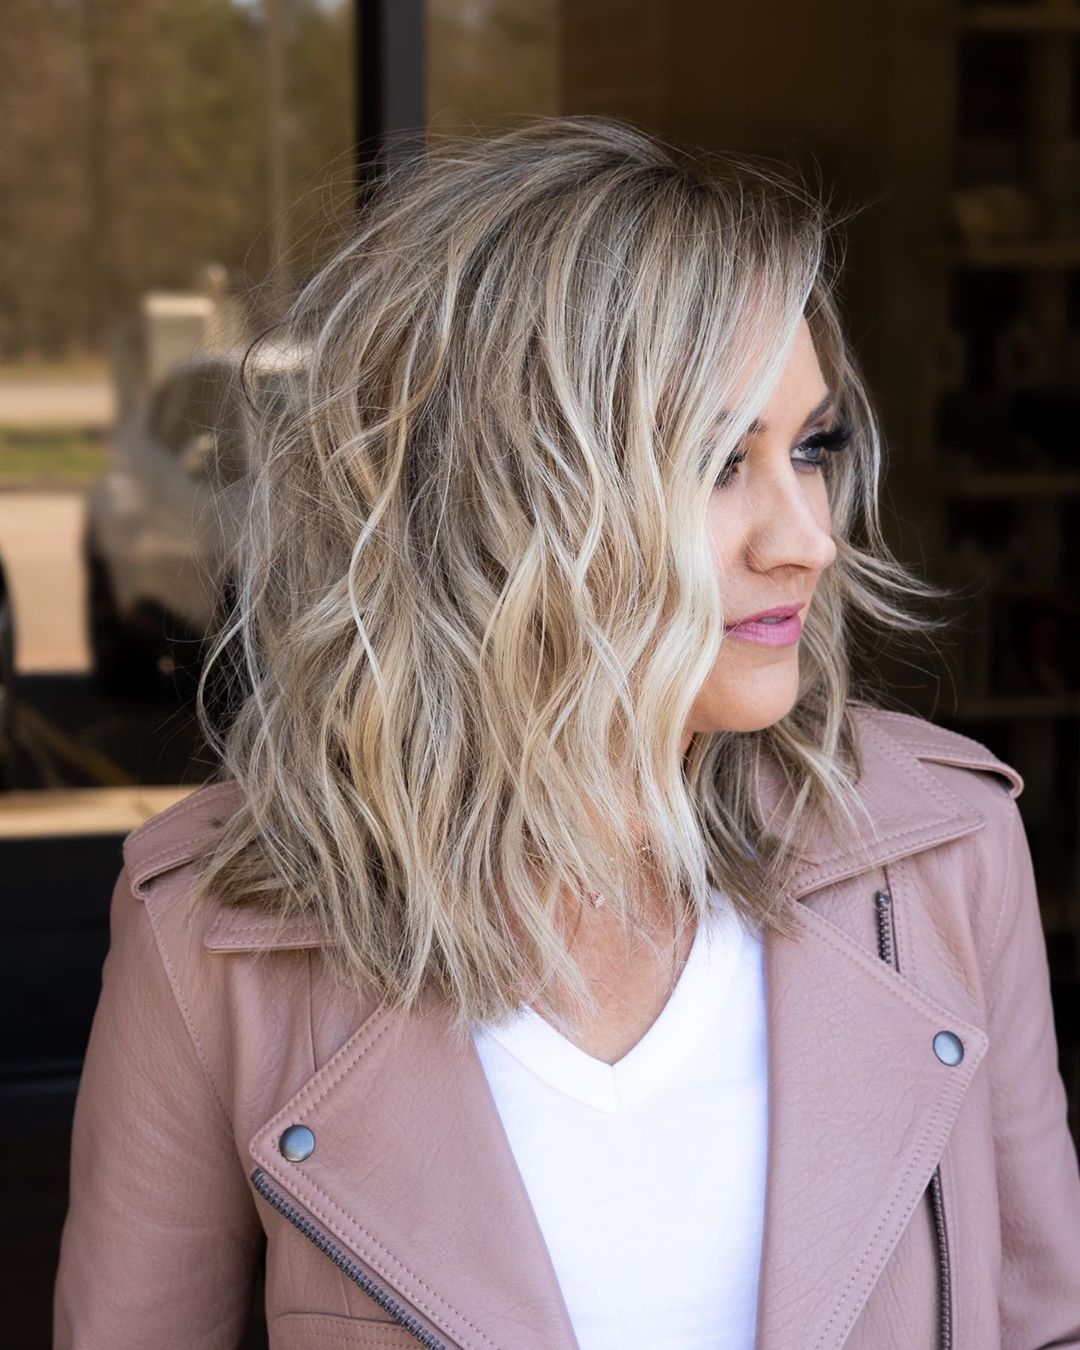 Fashionable spring haircuts for women 40-50 years old: 36 chic ideas